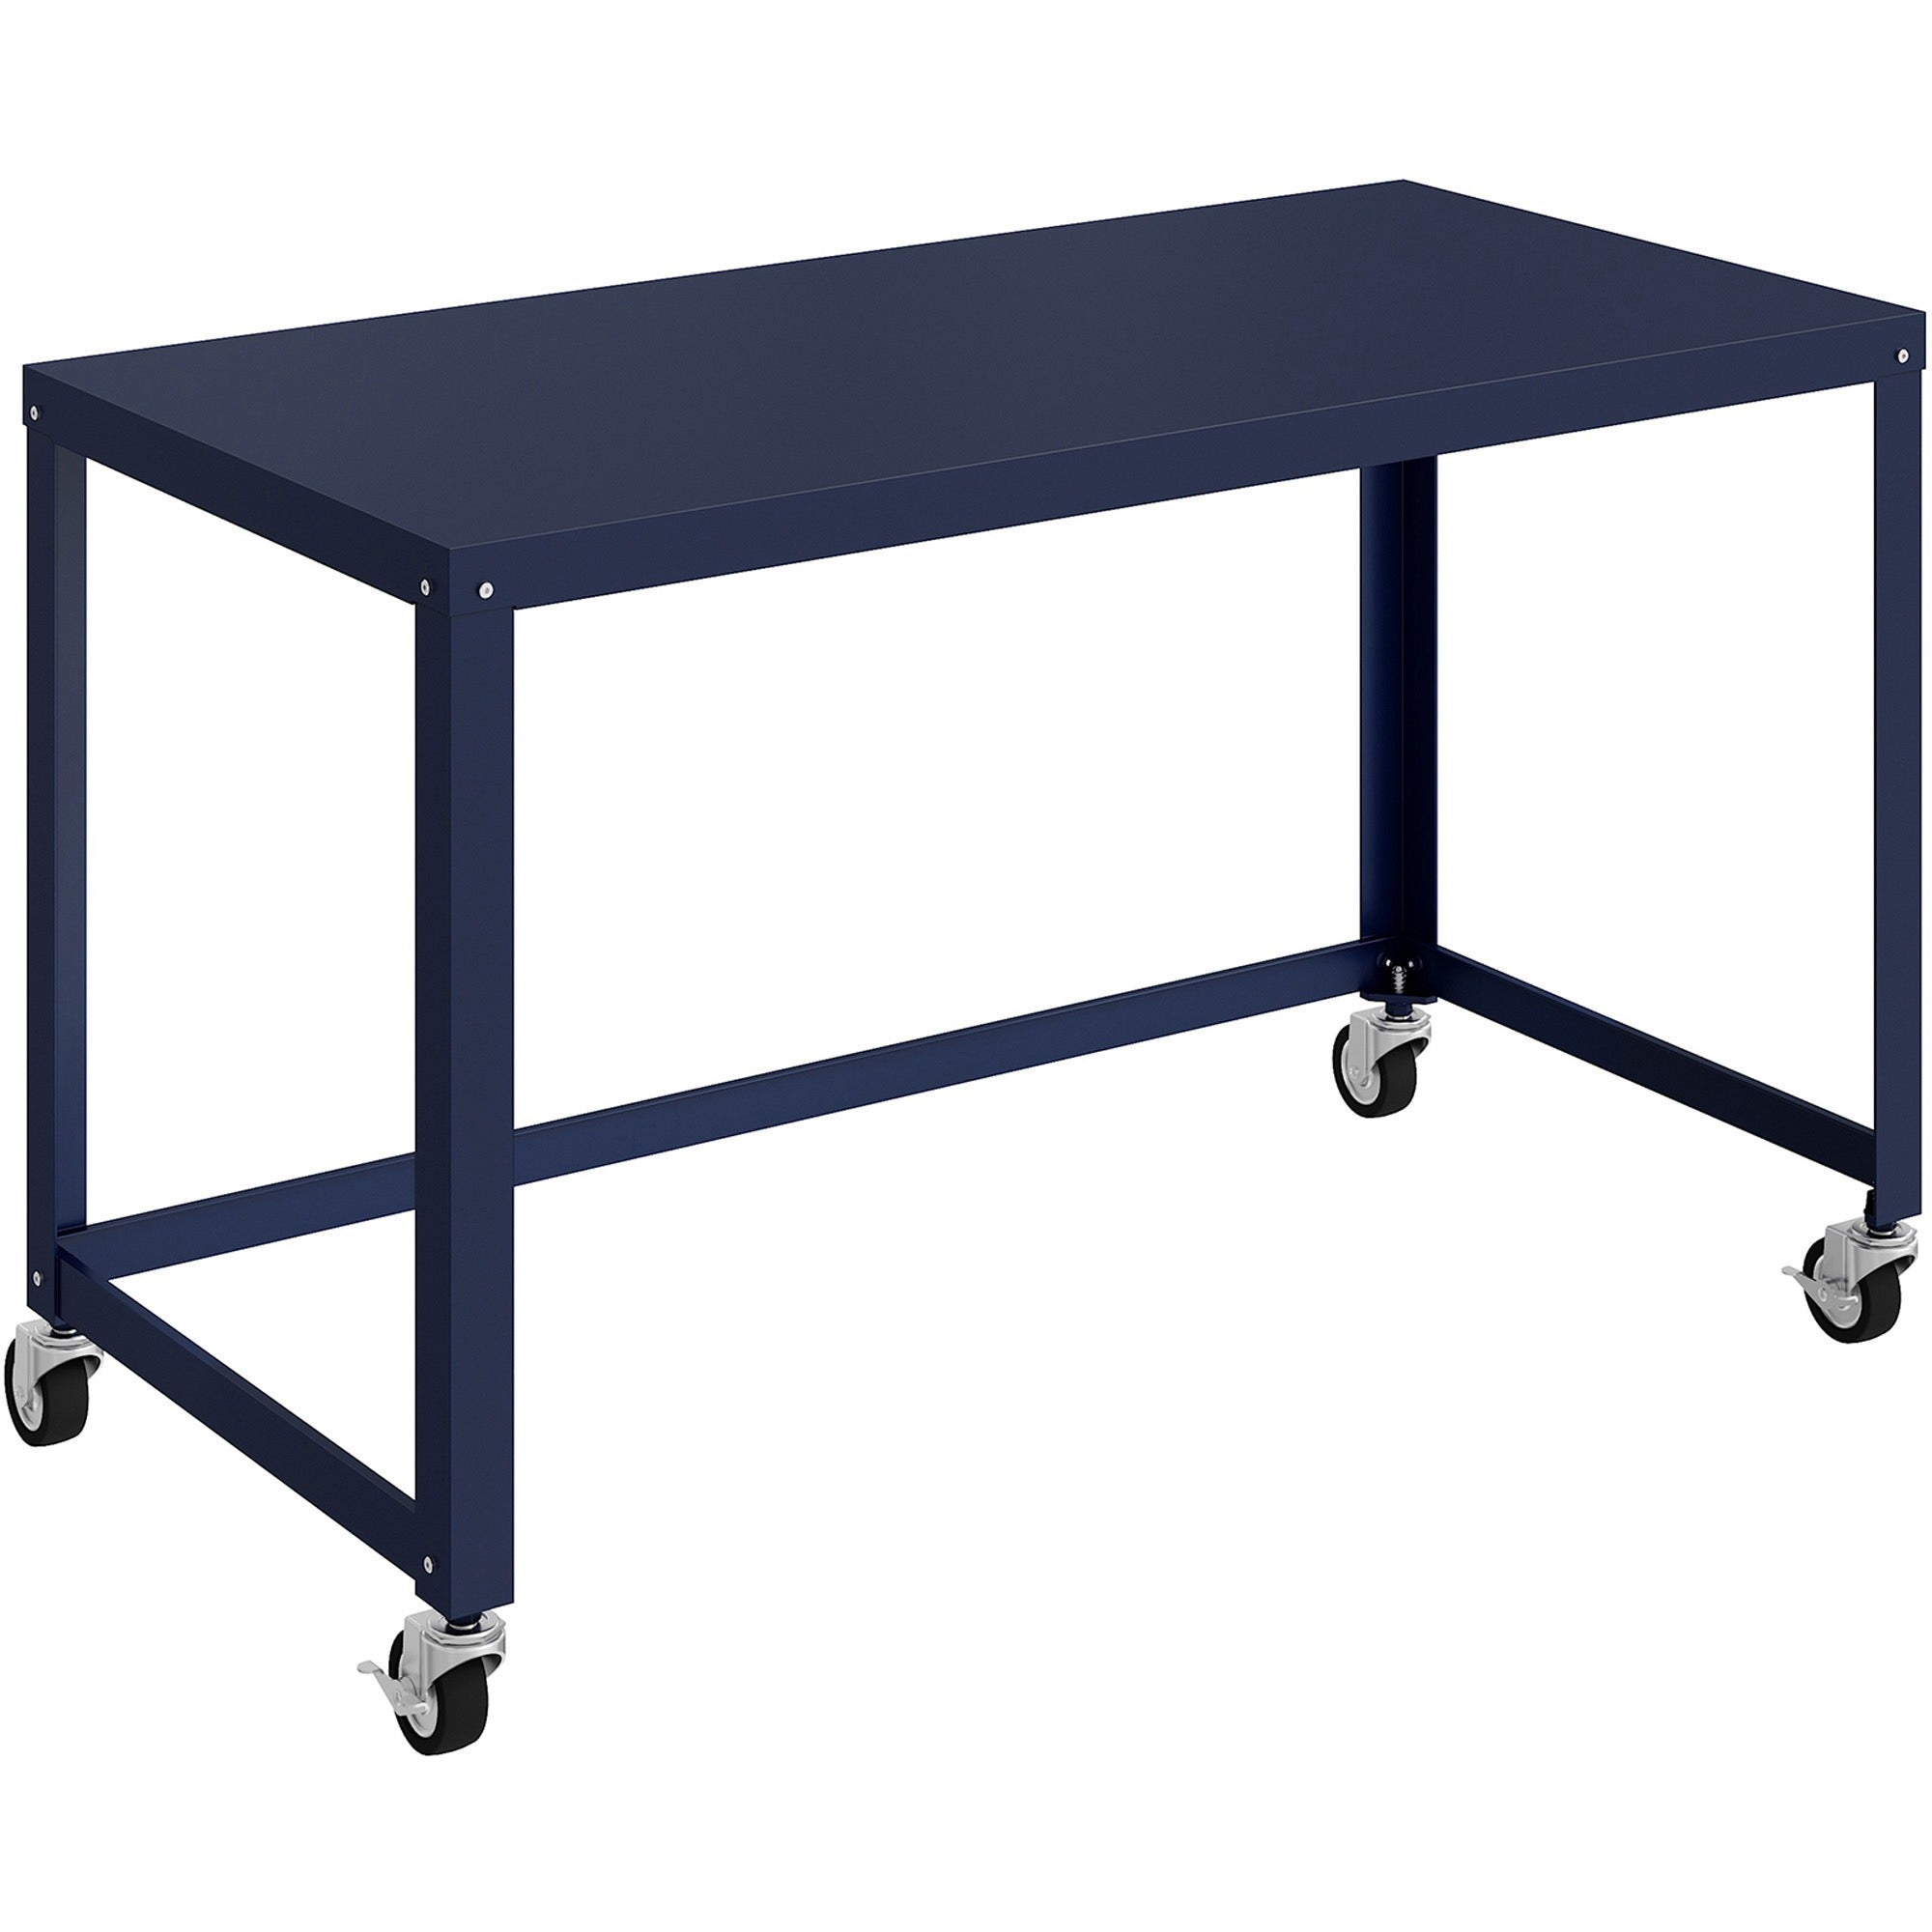 lorell-soho-personal-mobile-desk-for-table-toprectangle-top-200-lb-capacity-48-table-top-length-x-24-table-top-width-30-height-assembly-required-navy-steel-1-each_llr18335 - 1